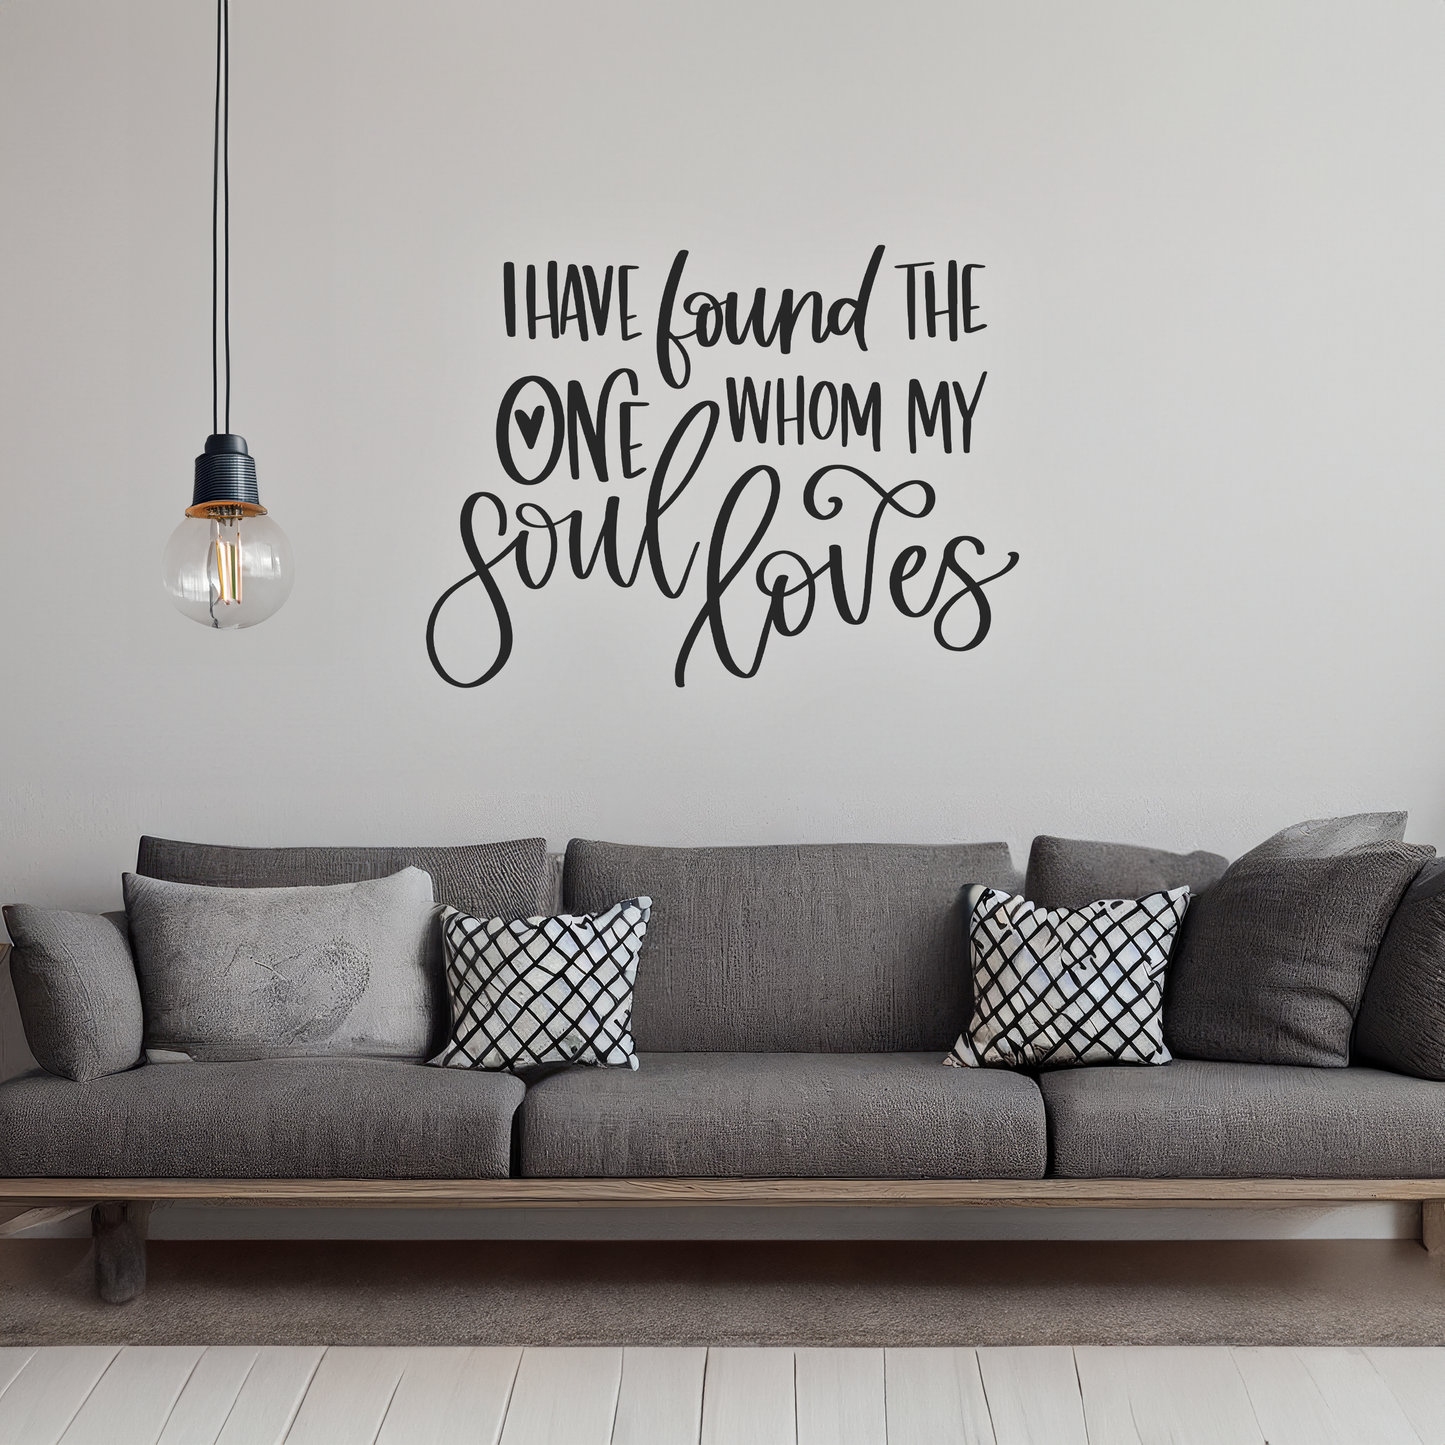 I Have Found The One Whom my Soul Loves Wall Sticker Decal